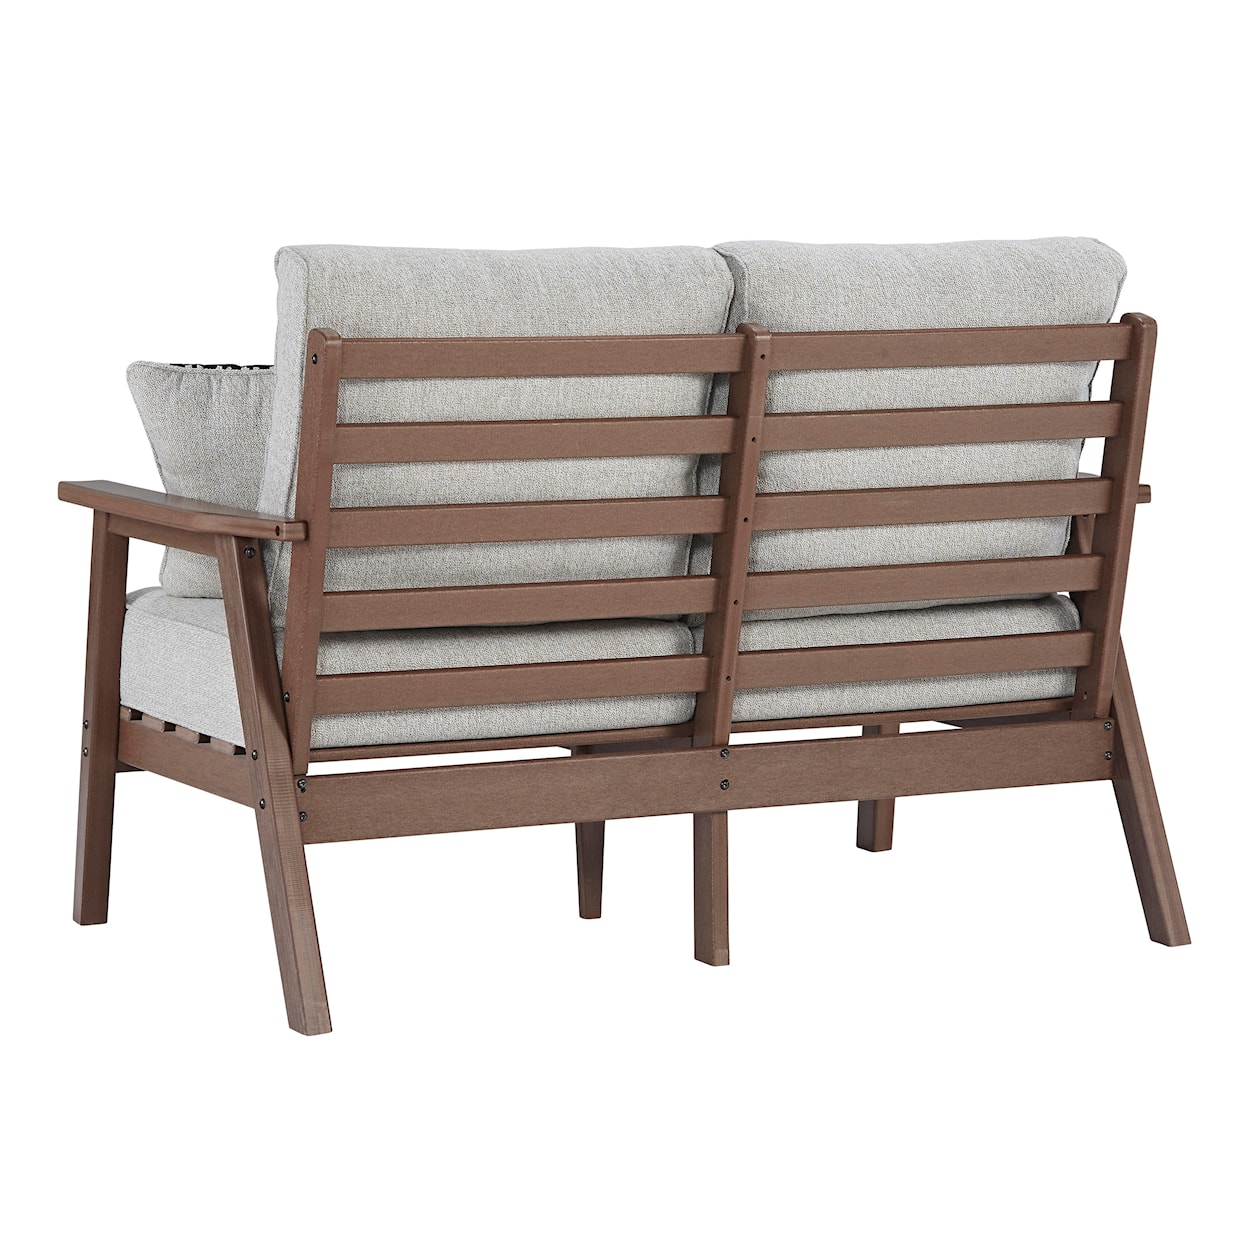 Signature Design by Ashley Emmeline Outdoor Loveseat with Cushion